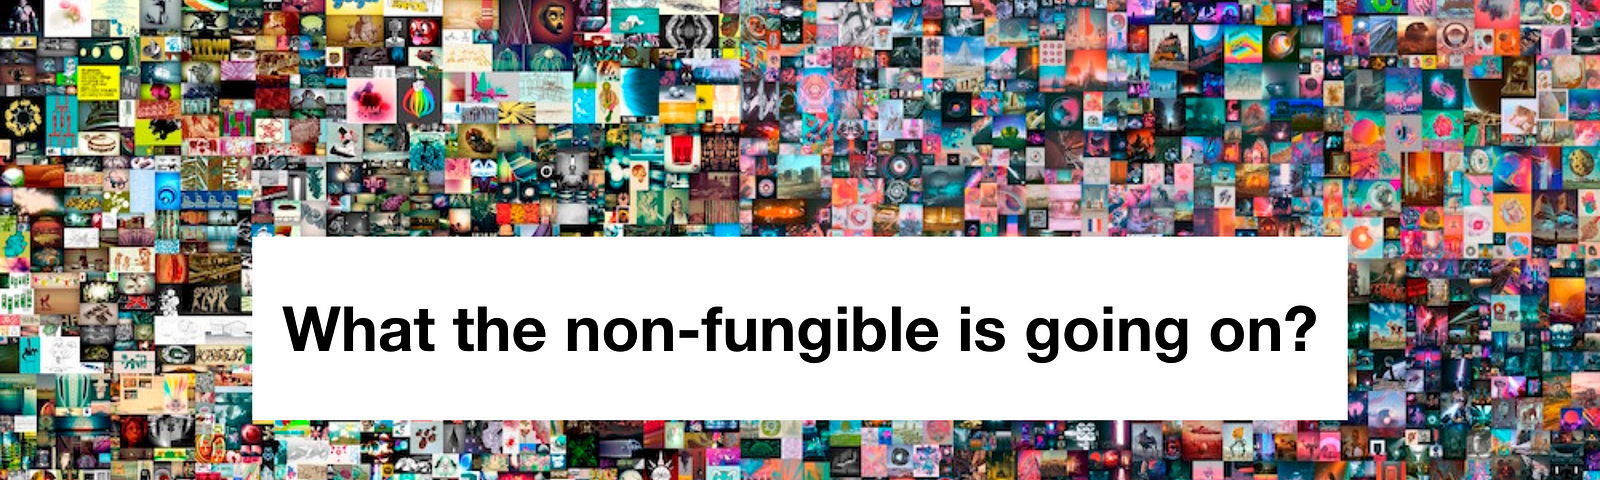 What the non-fungible is going on?